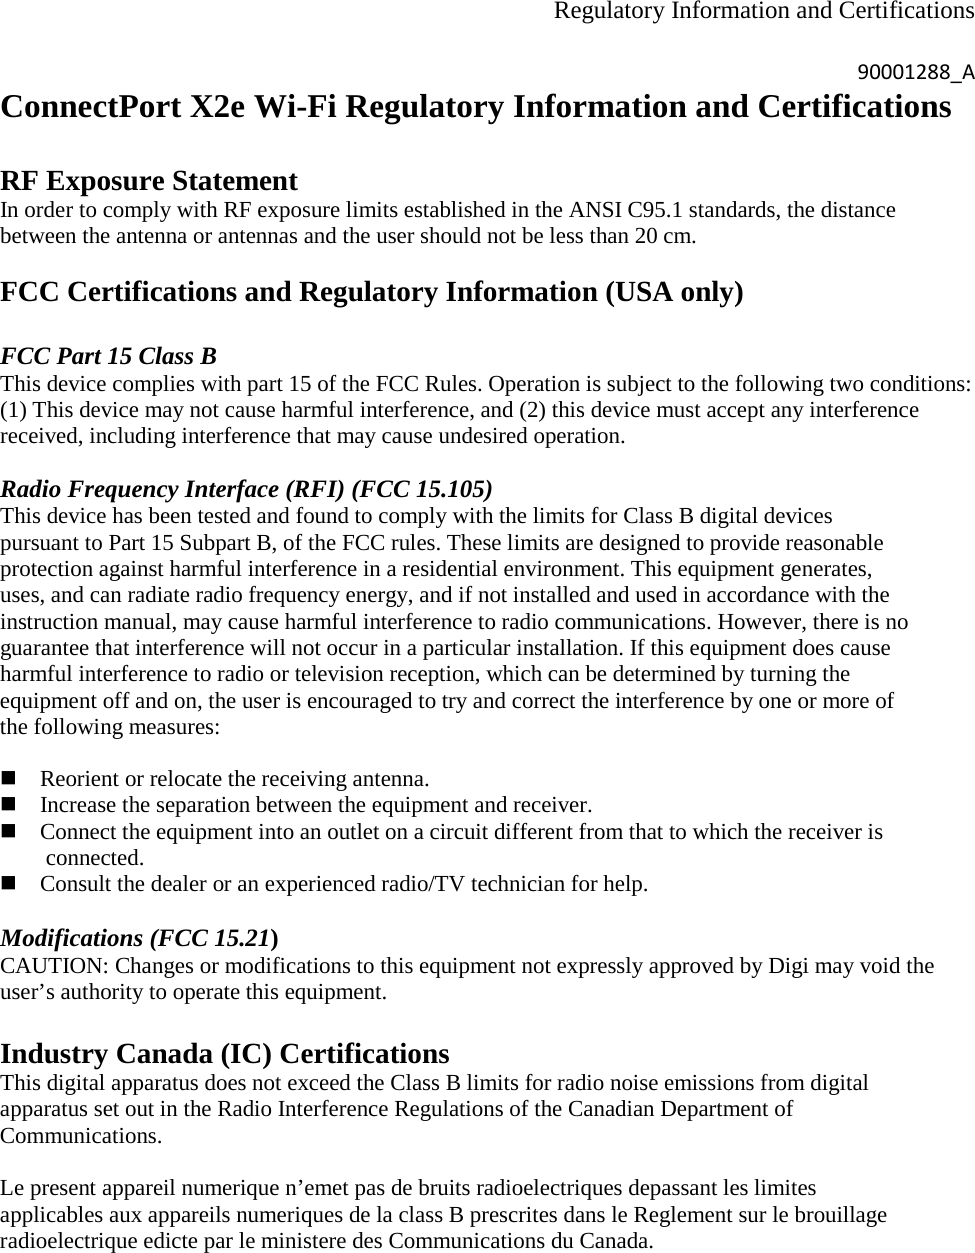 Regulatory Information and Certifications  90001288_A ConnectPort X2e Wi-Fi Regulatory Information and Certifications  RF Exposure Statement In order to comply with RF exposure limits established in the ANSI C95.1 standards, the distance between the antenna or antennas and the user should not be less than 20 cm.  FCC Certifications and Regulatory Information (USA only)  FCC Part 15 Class B This device complies with part 15 of the FCC Rules. Operation is subject to the following two conditions: (1) This device may not cause harmful interference, and (2) this device must accept any interference received, including interference that may cause undesired operation.  Radio Frequency Interface (RFI) (FCC 15.105) This device has been tested and found to comply with the limits for Class B digital devices pursuant to Part 15 Subpart B, of the FCC rules. These limits are designed to provide reasonable protection against harmful interference in a residential environment. This equipment generates, uses, and can radiate radio frequency energy, and if not installed and used in accordance with the instruction manual, may cause harmful interference to radio communications. However, there is no guarantee that interference will not occur in a particular installation. If this equipment does cause harmful interference to radio or television reception, which can be determined by turning the equipment off and on, the user is encouraged to try and correct the interference by one or more of the following measures:   Reorient or relocate the receiving antenna.  Increase the separation between the equipment and receiver.  Connect the equipment into an outlet on a circuit different from that to which the receiver is                    connected.  Consult the dealer or an experienced radio/TV technician for help.  Modifications (FCC 15.21) CAUTION: Changes or modifications to this equipment not expressly approved by Digi may void the user’s authority to operate this equipment.  Industry Canada (IC) Certifications This digital apparatus does not exceed the Class B limits for radio noise emissions from digital apparatus set out in the Radio Interference Regulations of the Canadian Department of Communications.  Le present appareil numerique n’emet pas de bruits radioelectriques depassant les limites applicables aux appareils numeriques de la class B prescrites dans le Reglement sur le brouillage radioelectrique edicte par le ministere des Communications du Canada.  